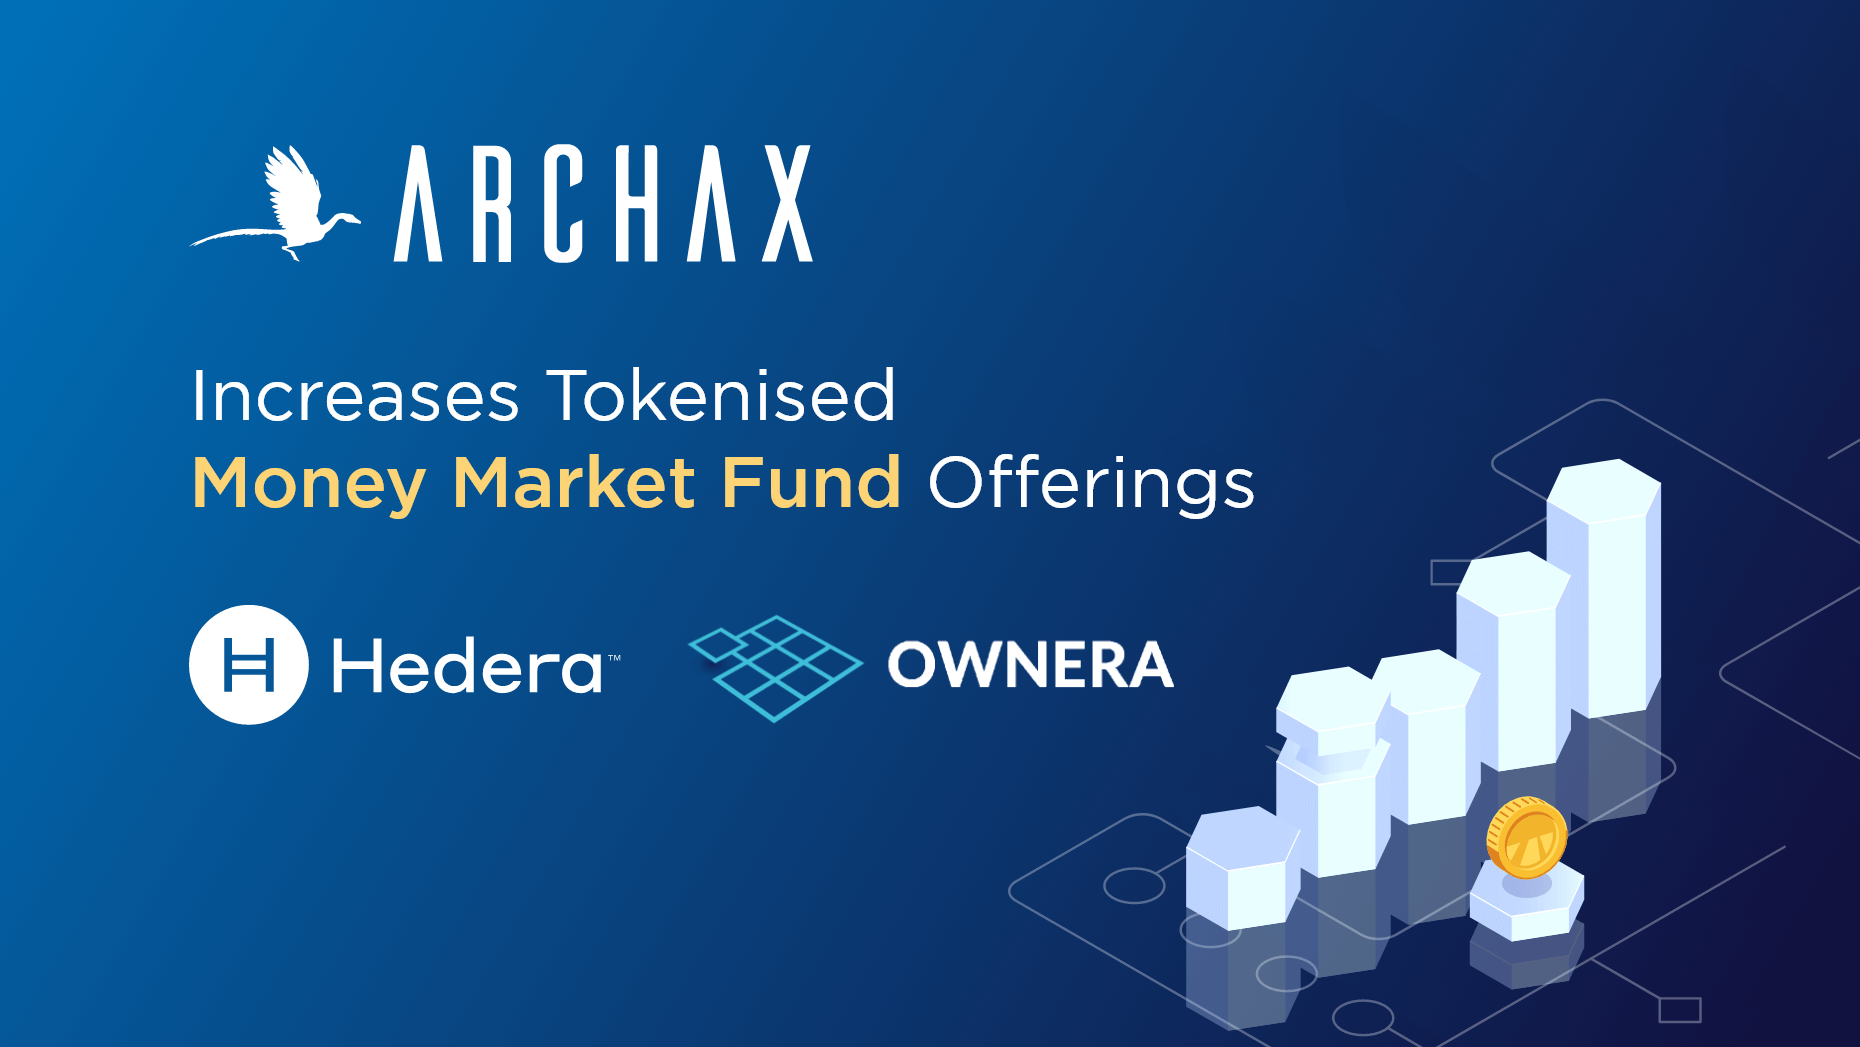 Archax Increases Tokenised Money Market Fund Offerings